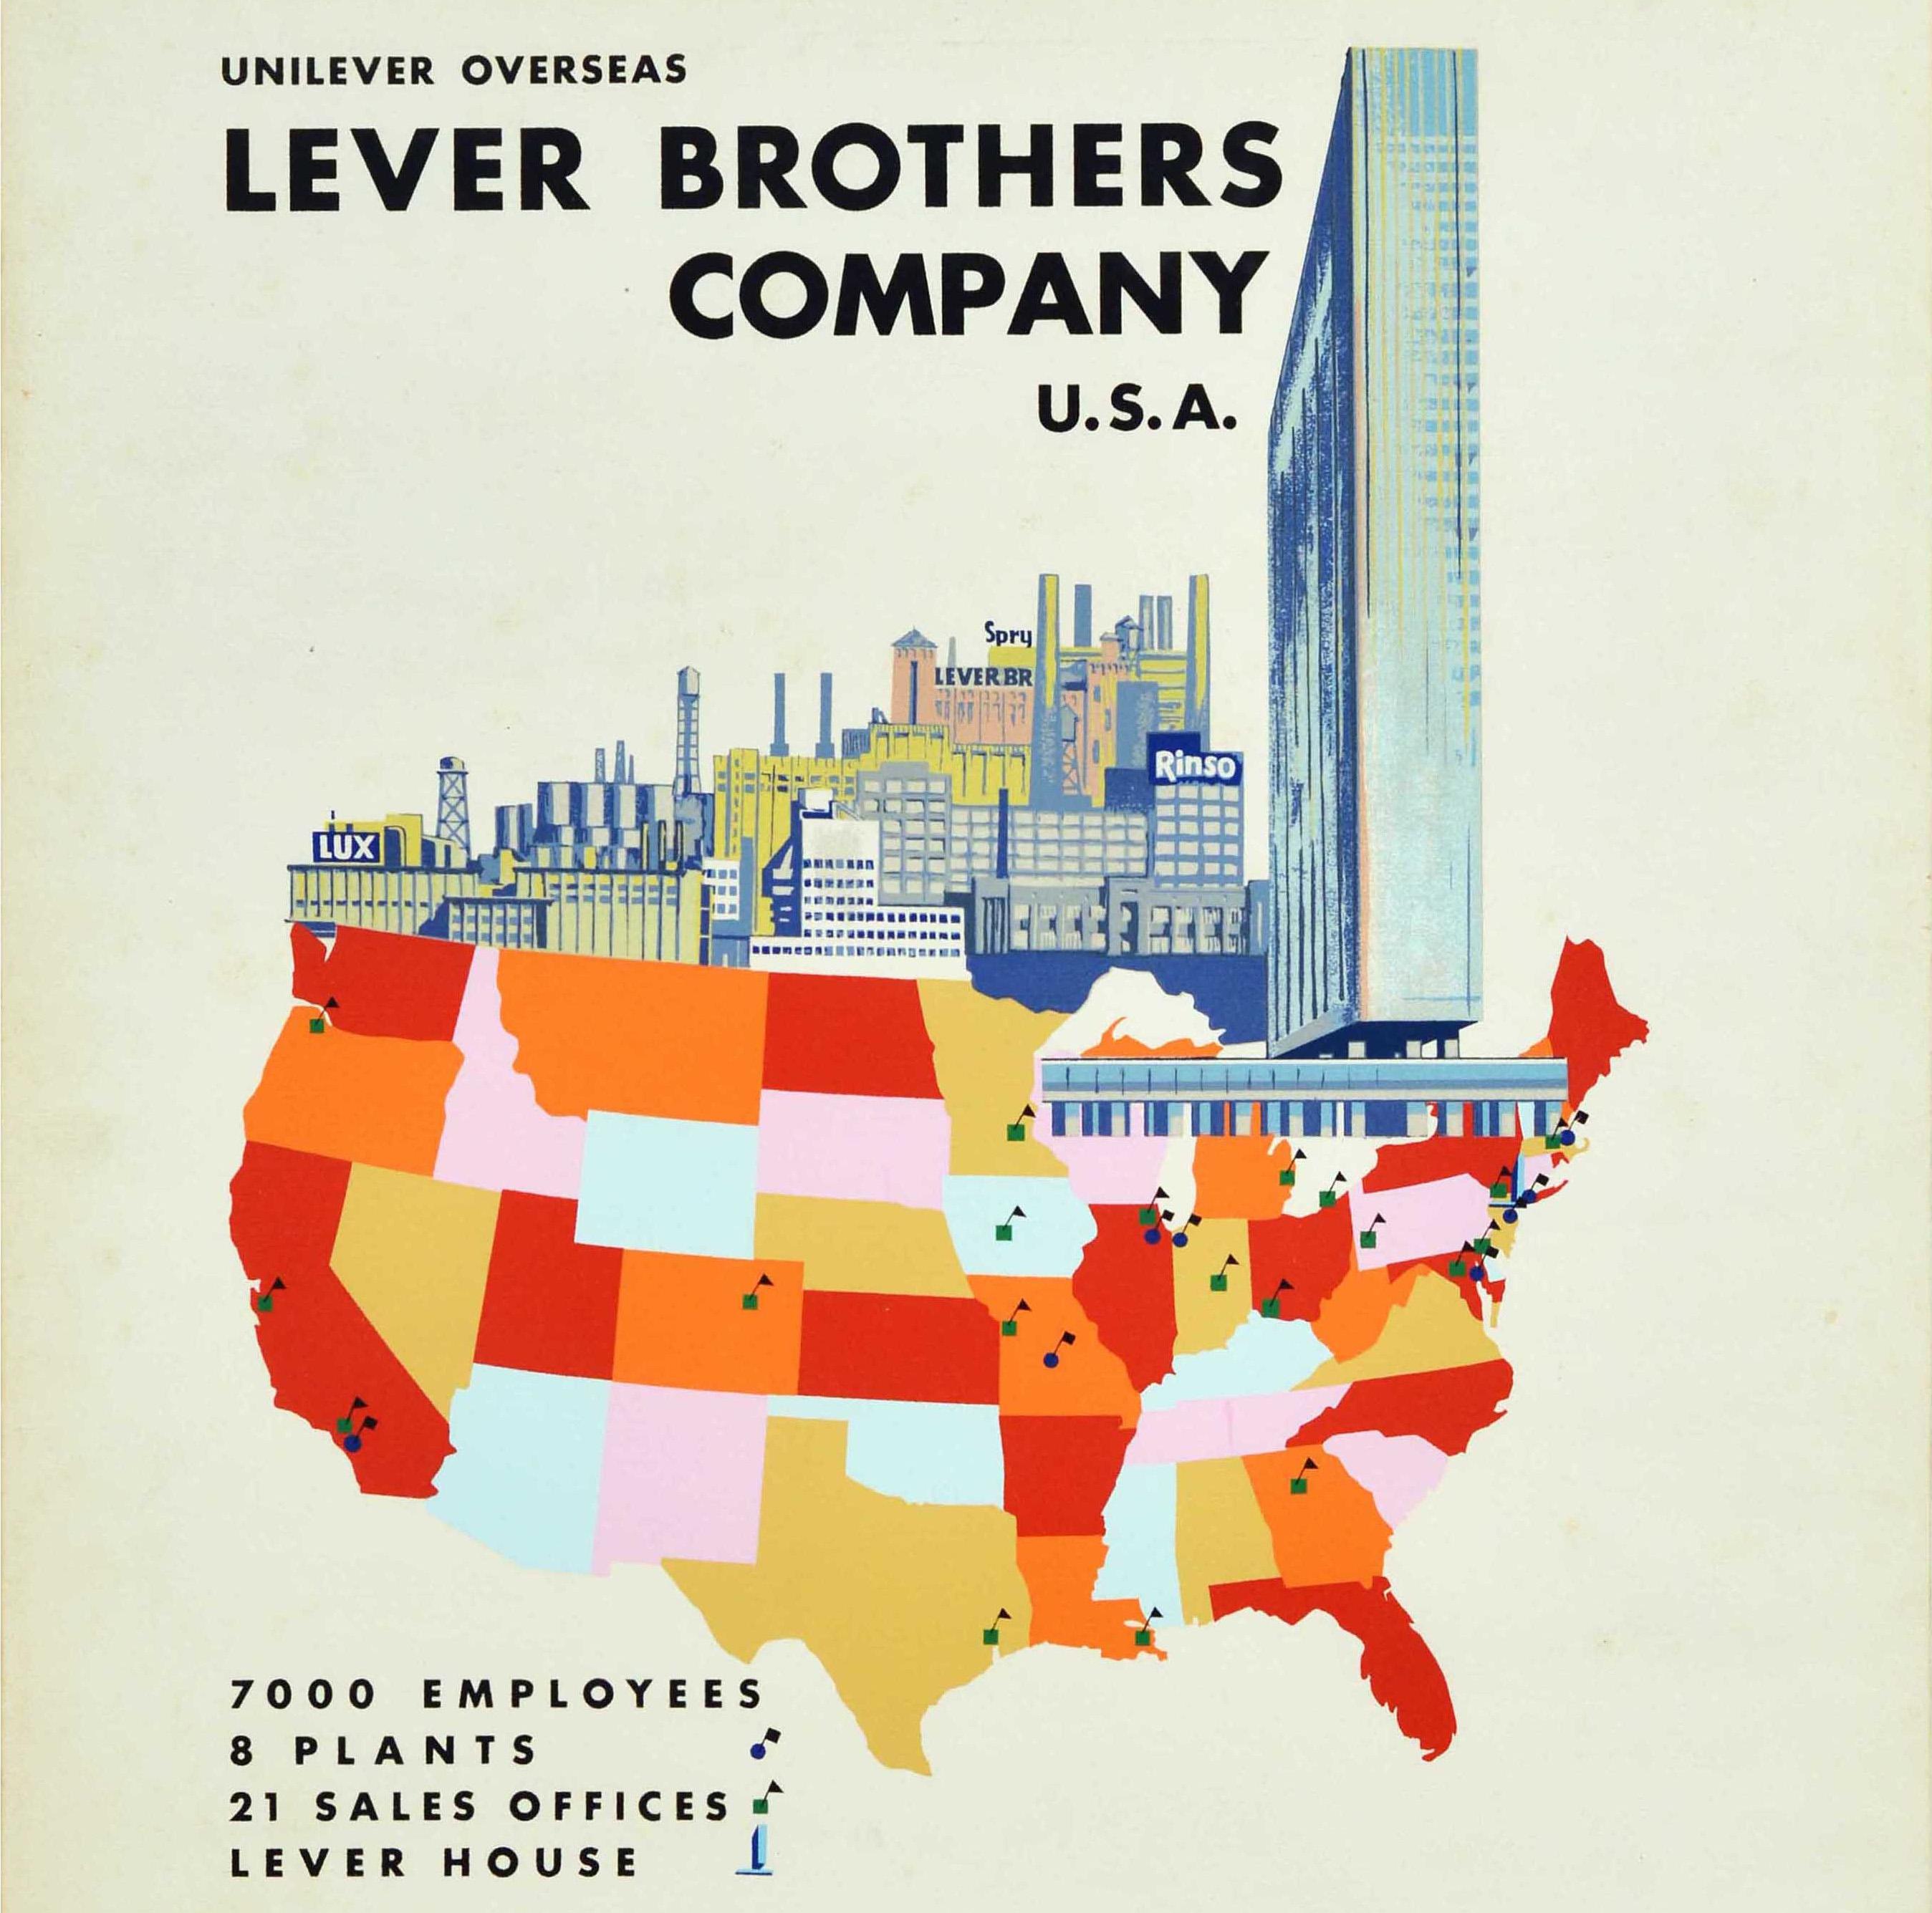 Original Vintage Advertising Poster Unilever Overseas Lever Brothers Company - Print by Lili Rethi